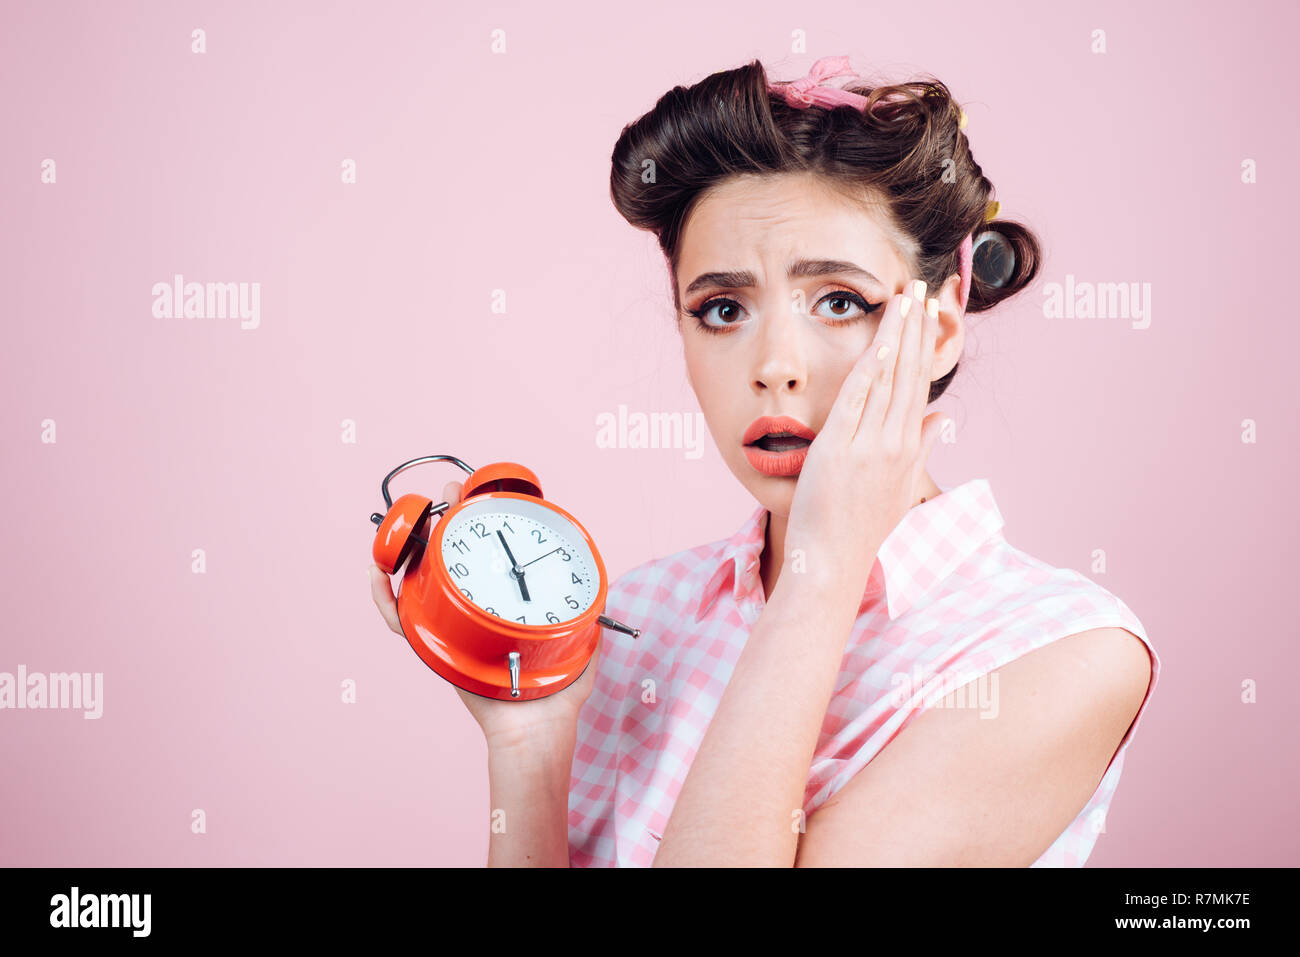 good morning. time management. pinup girl with fashion hair. retro woman  with alarm clock. Time. pin